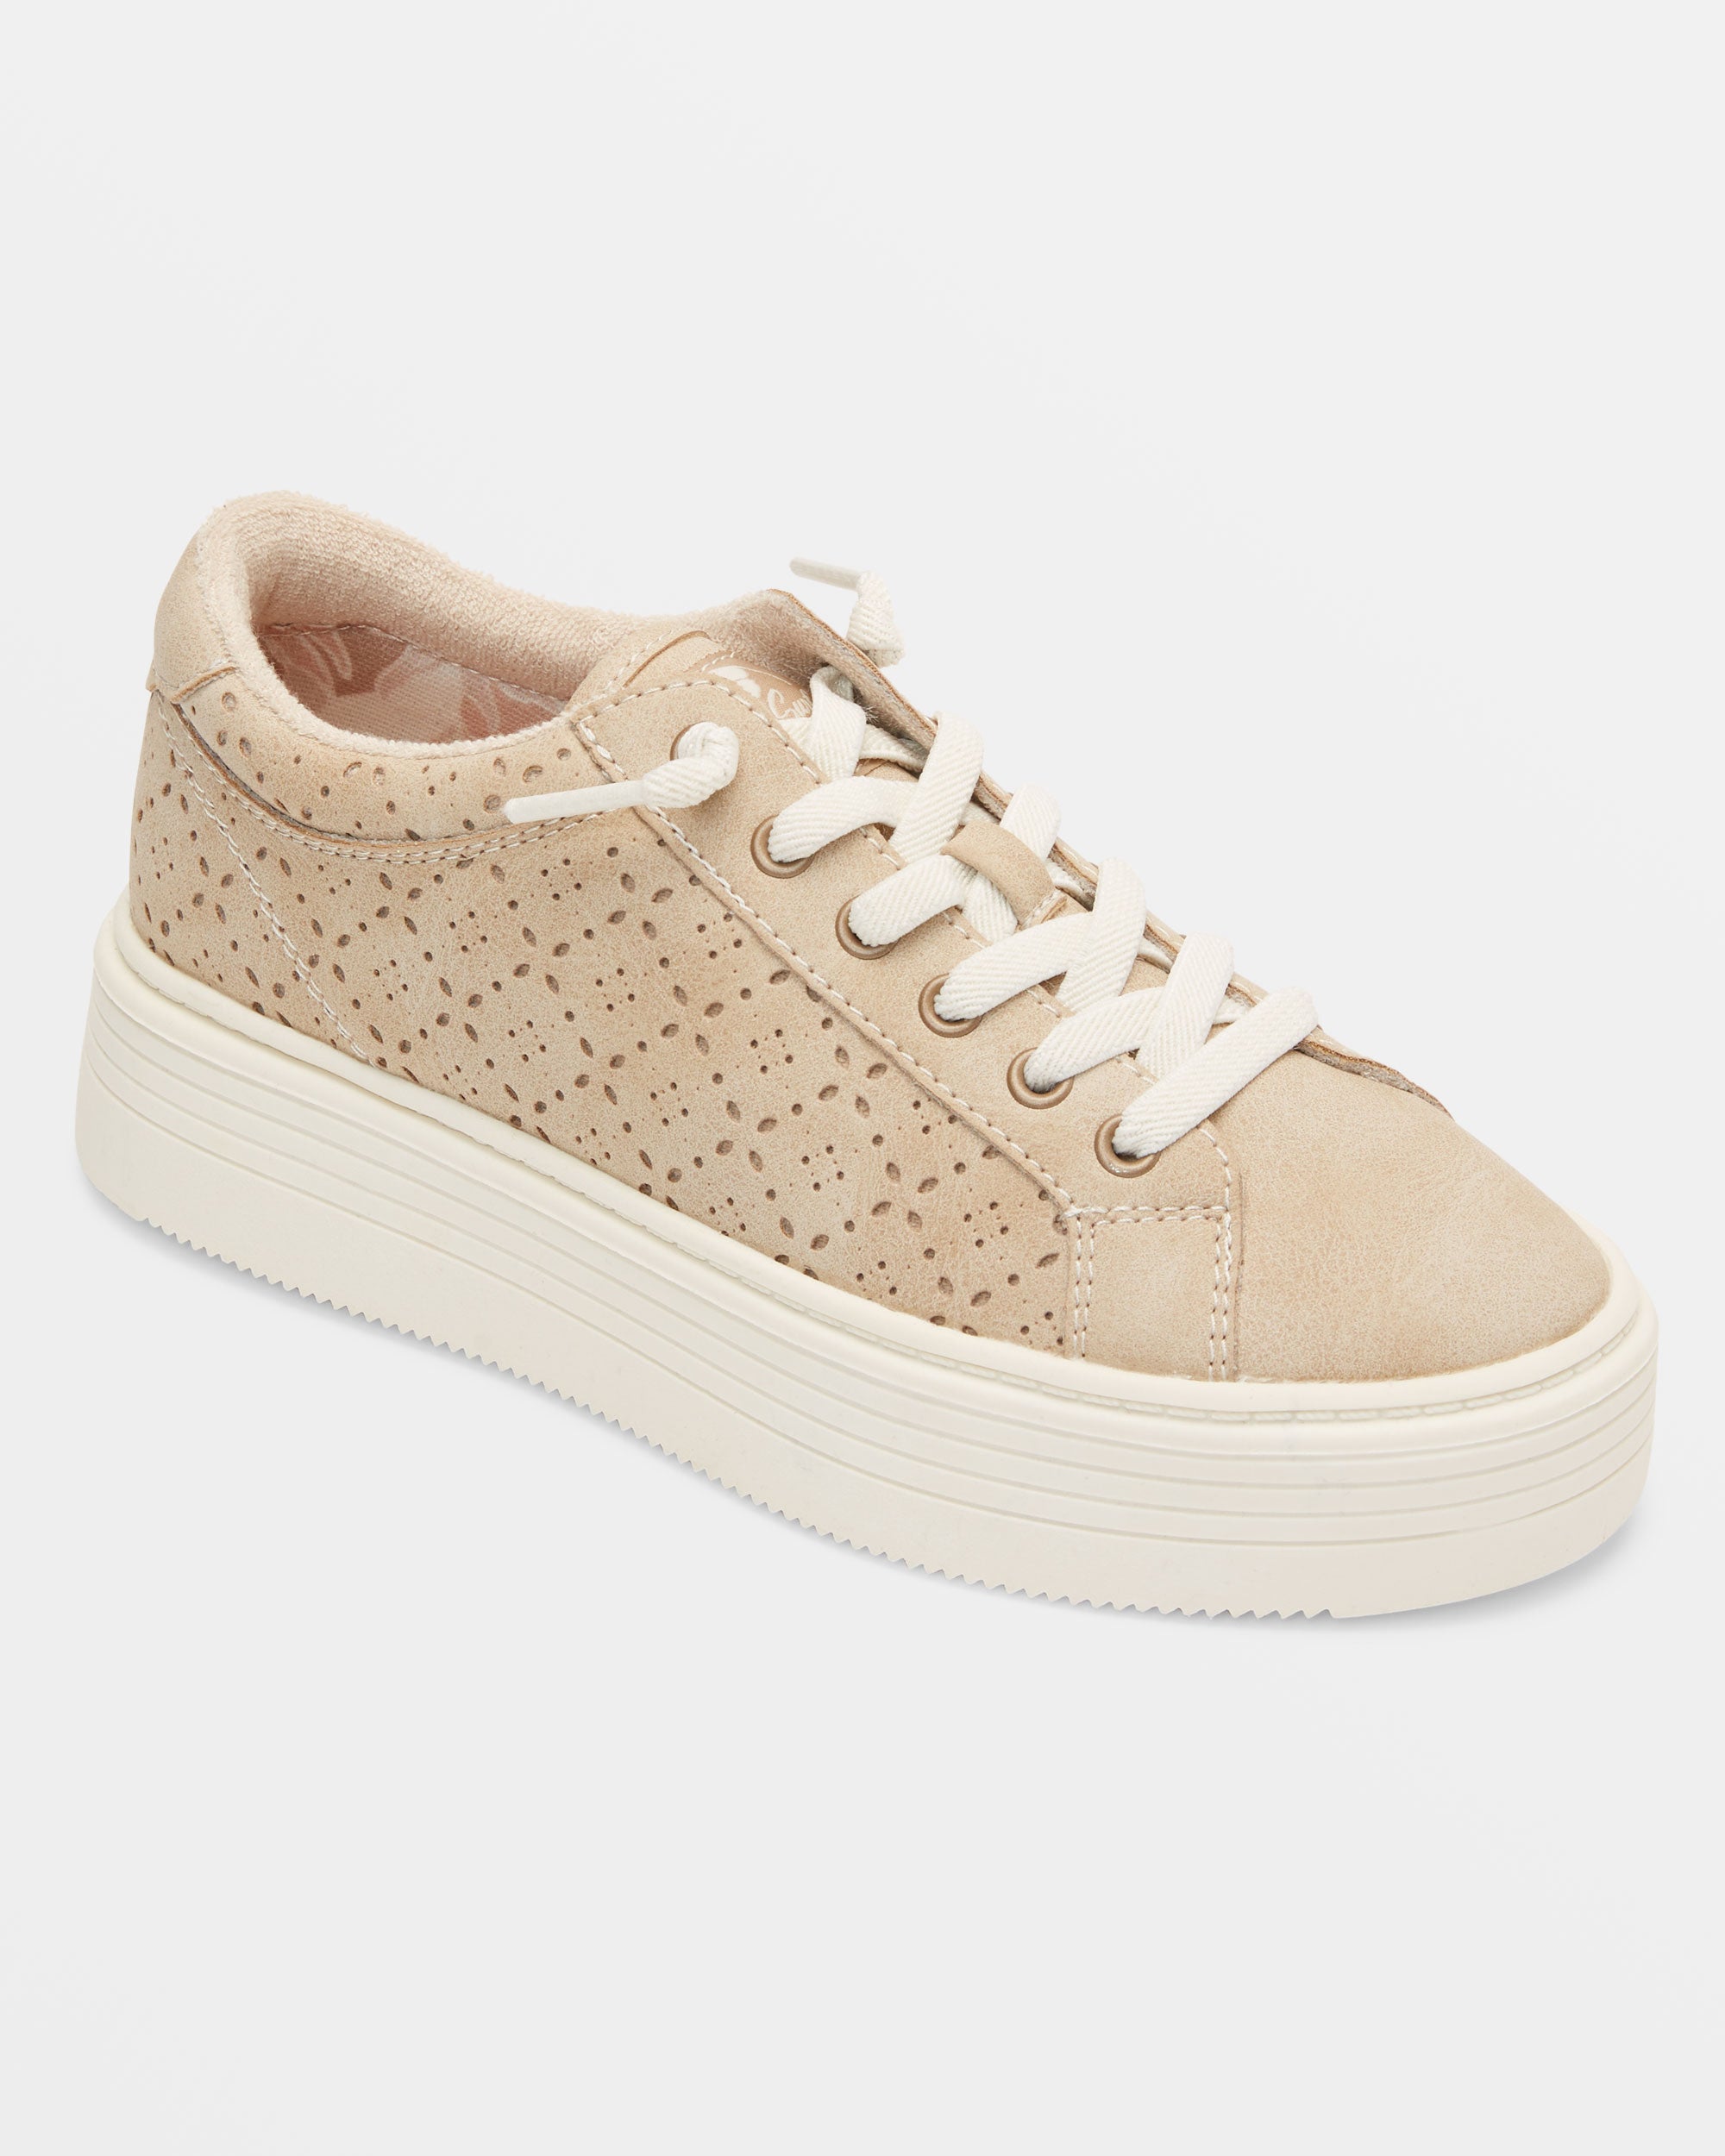 Sheilahh 2.0 Shoes - Light Brown